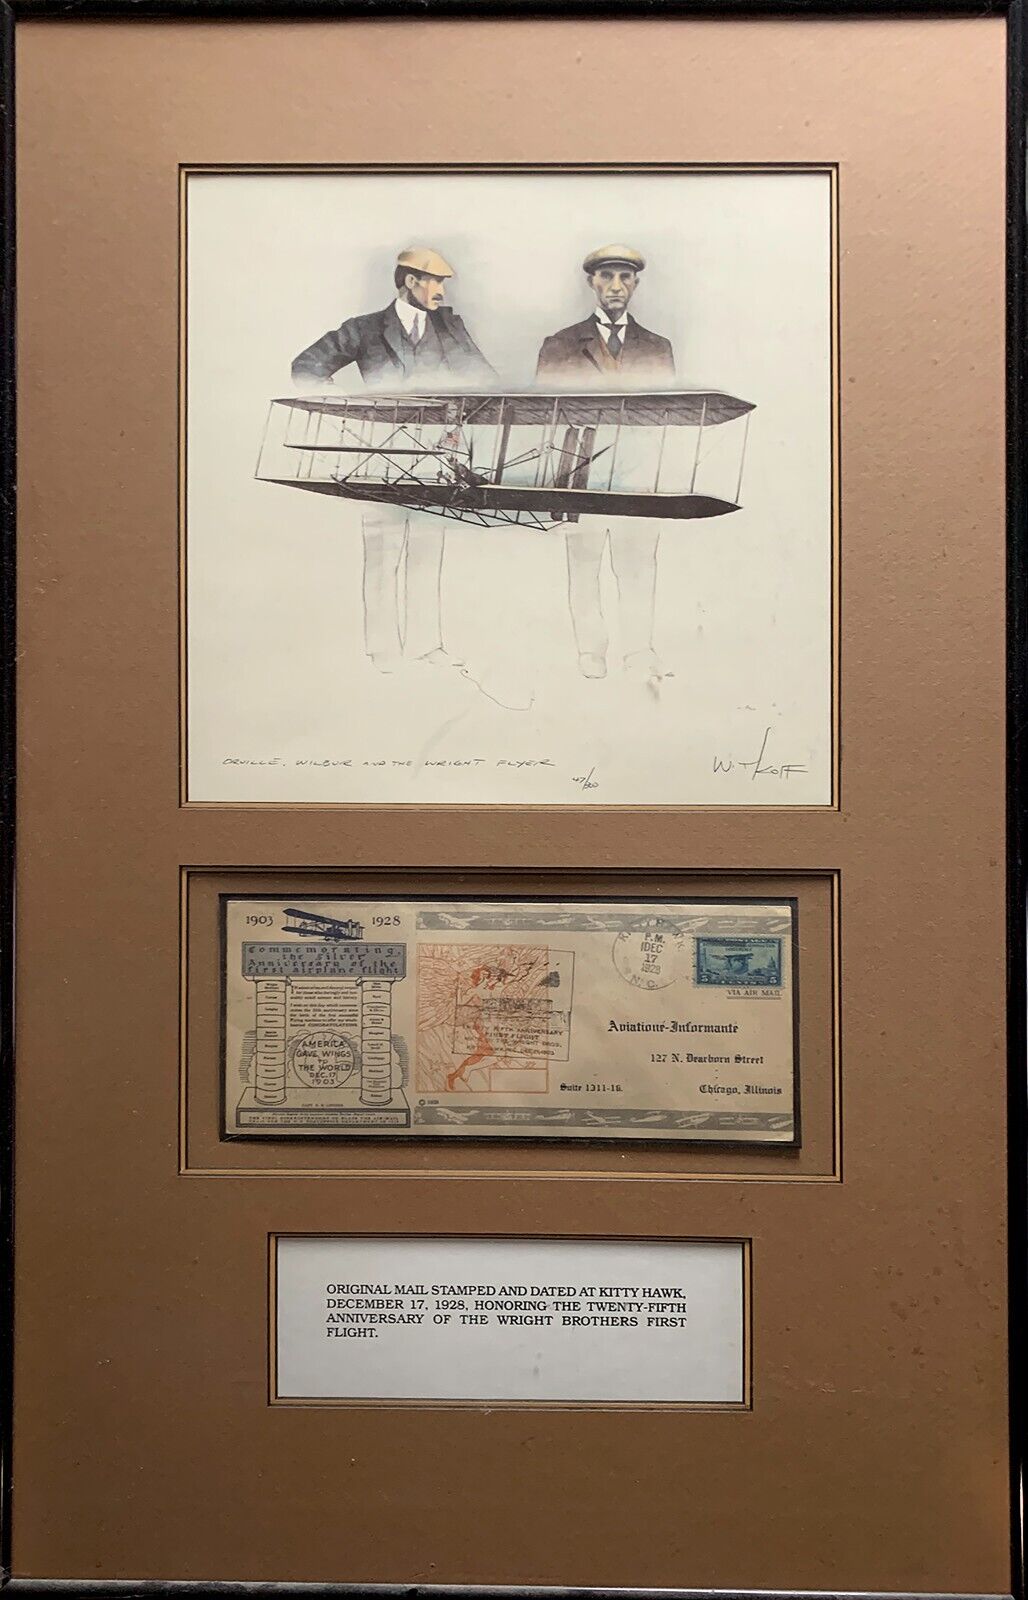 1st Day Issue Wright Brothers Flight Memorabilia by Dan Witkoff